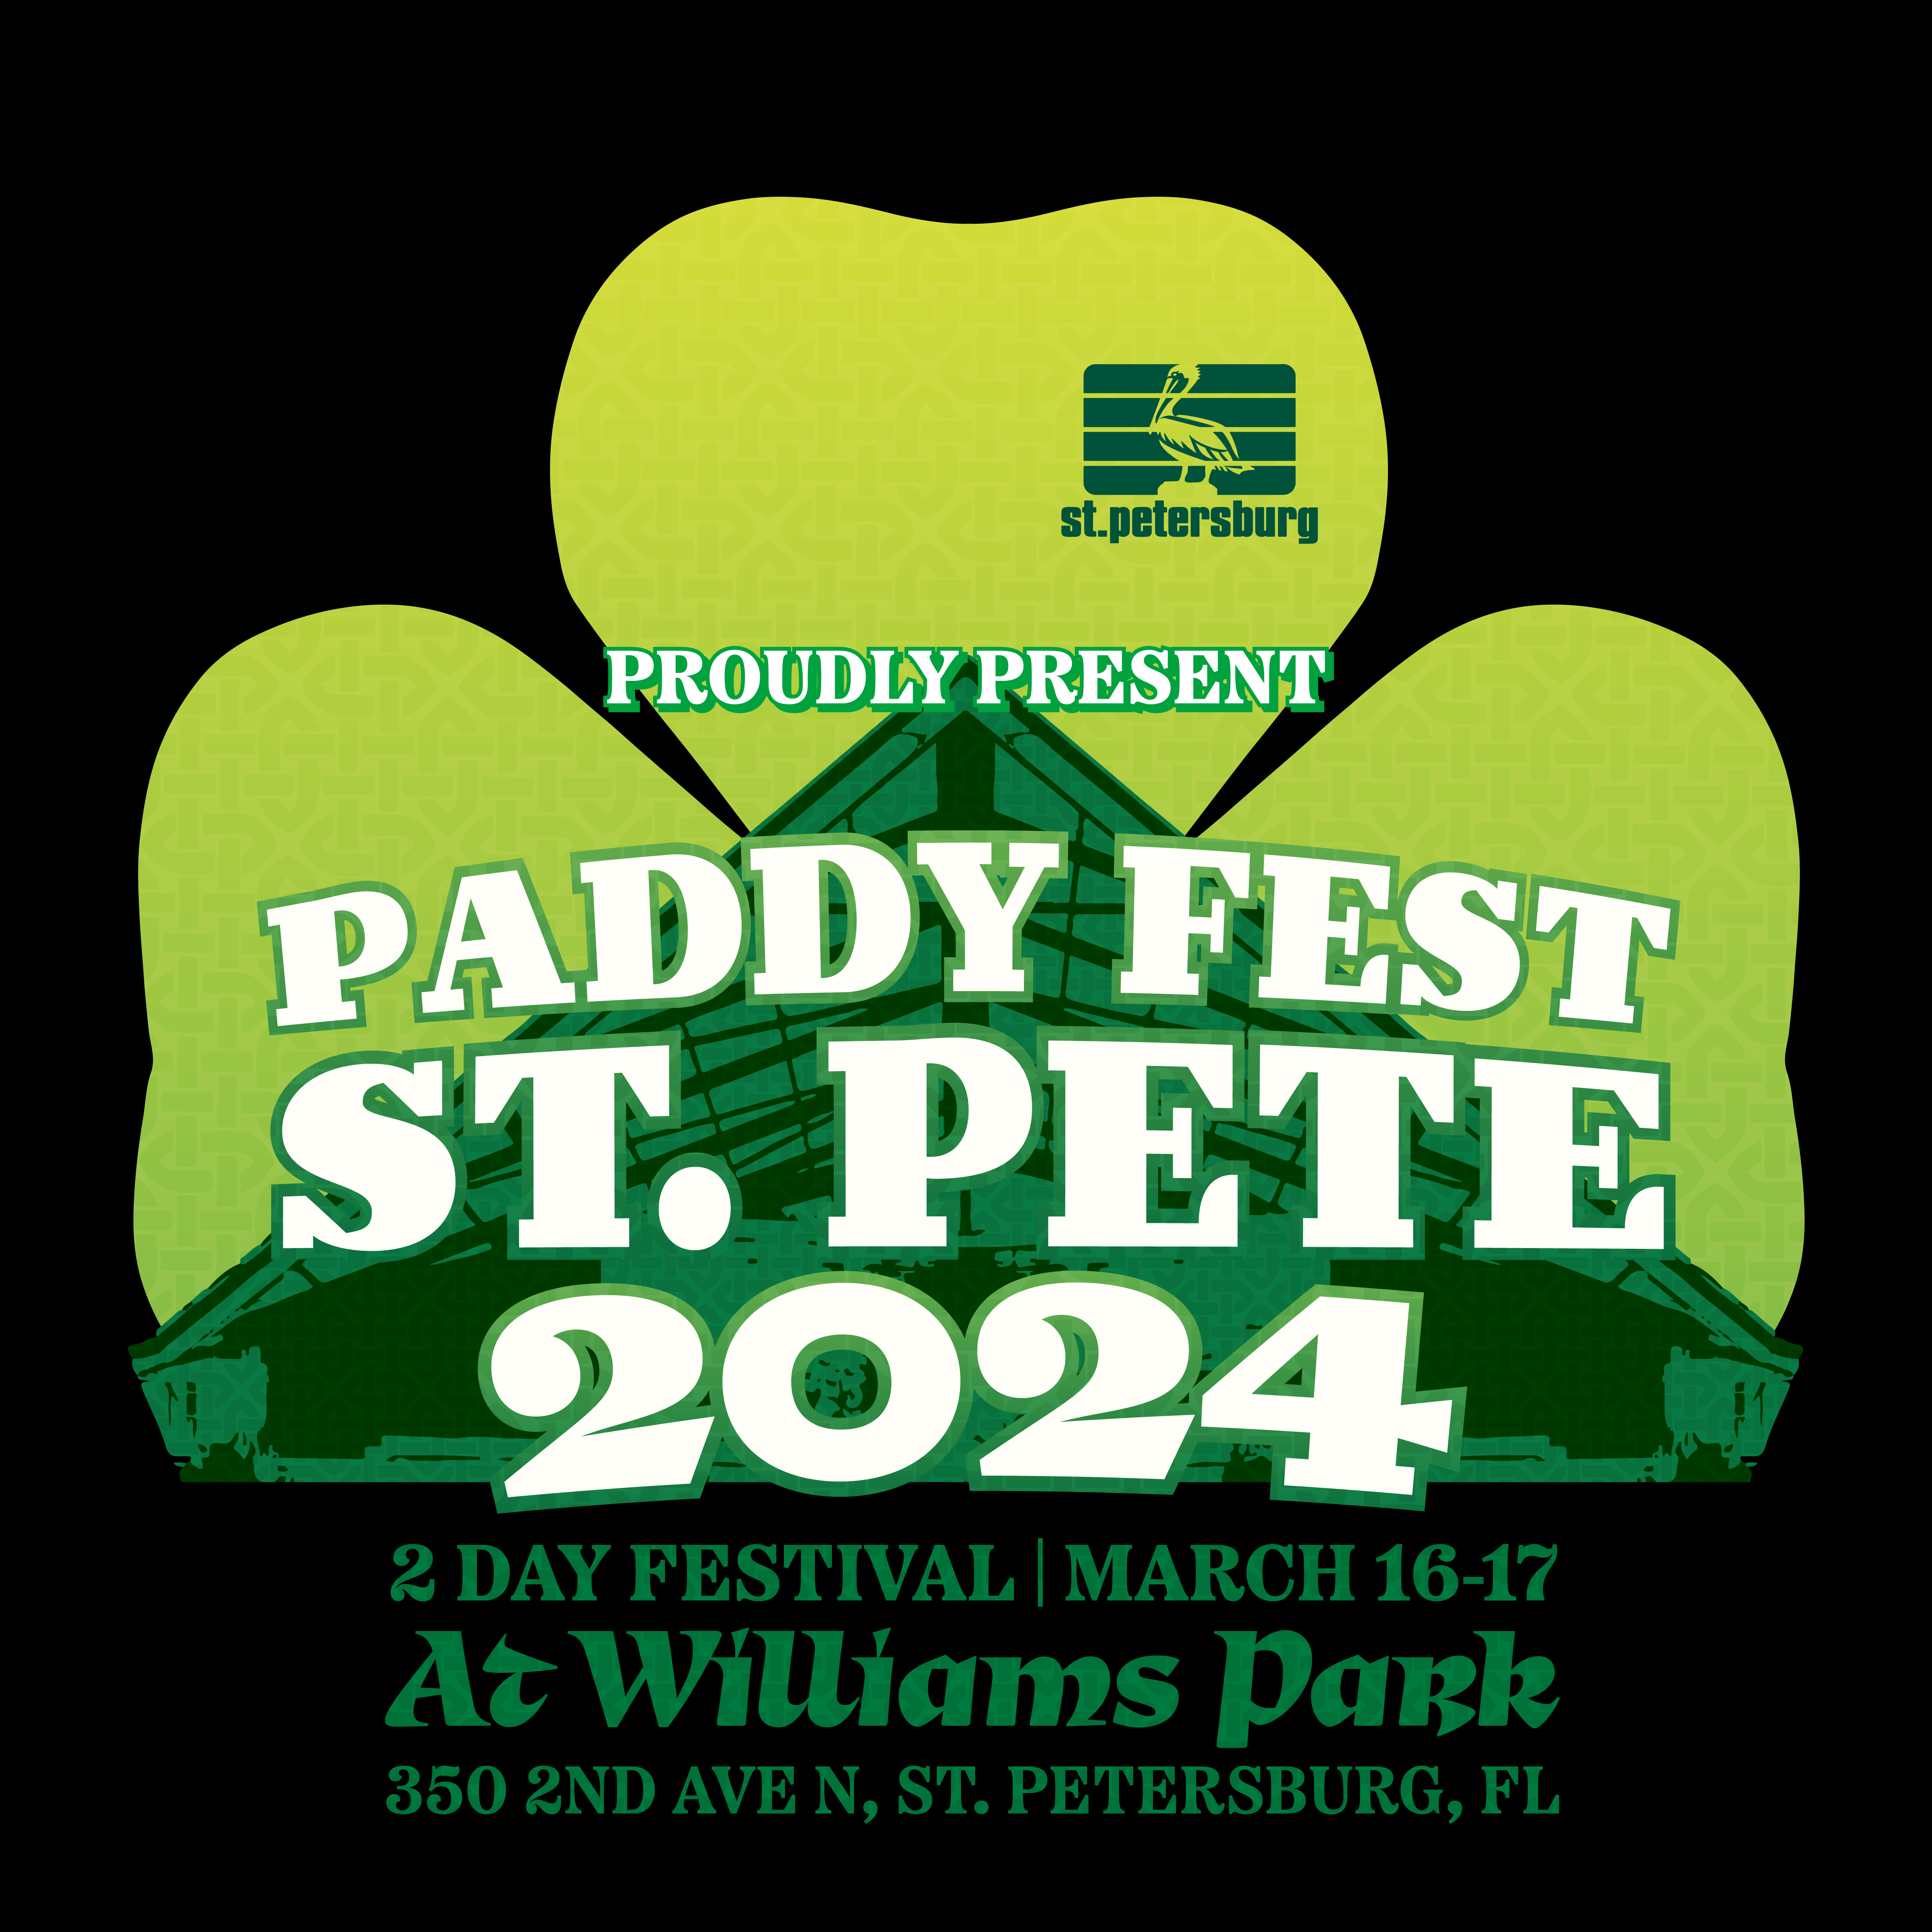 “Paddy Fest St. Pete” is Back with Two Days of Family Fun and Festivities in Williams Park